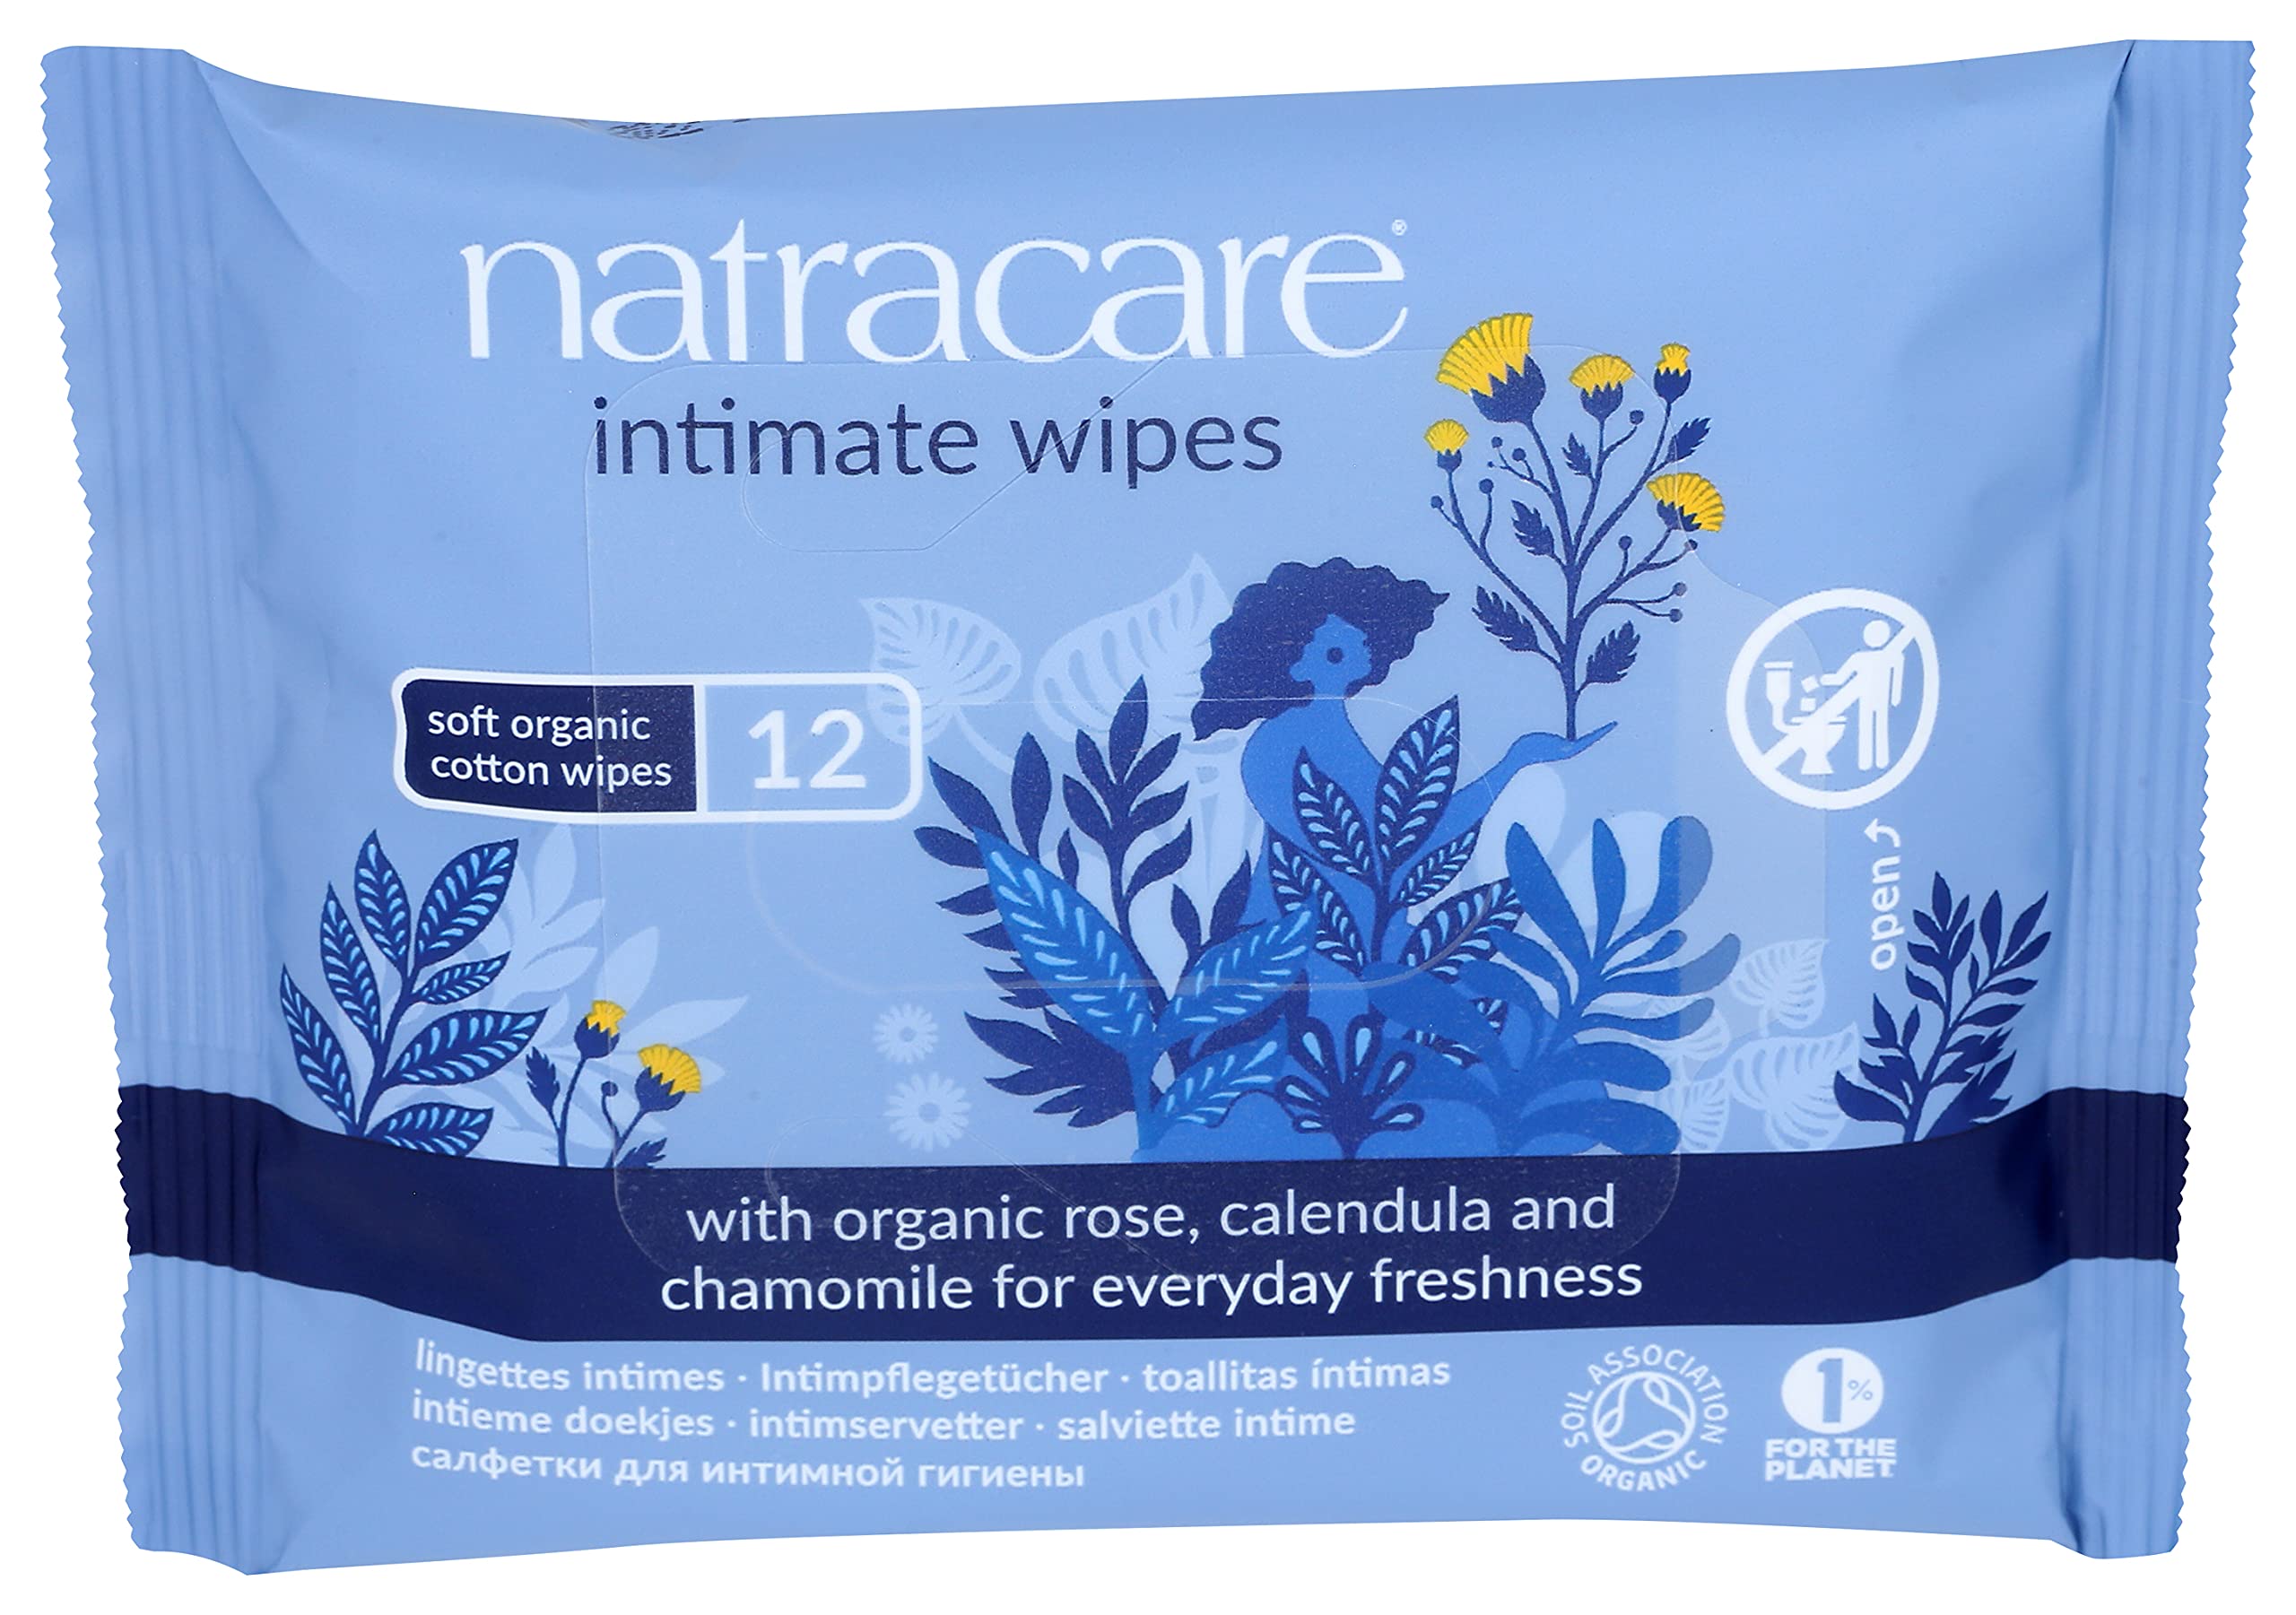 Natracare Organic Cotton Intimate Wipes Infused with Organic Essential Oils of Chamomile, Calendula and French Rose, 12 Wipes per pack (24 Pack, 288 wipes total)